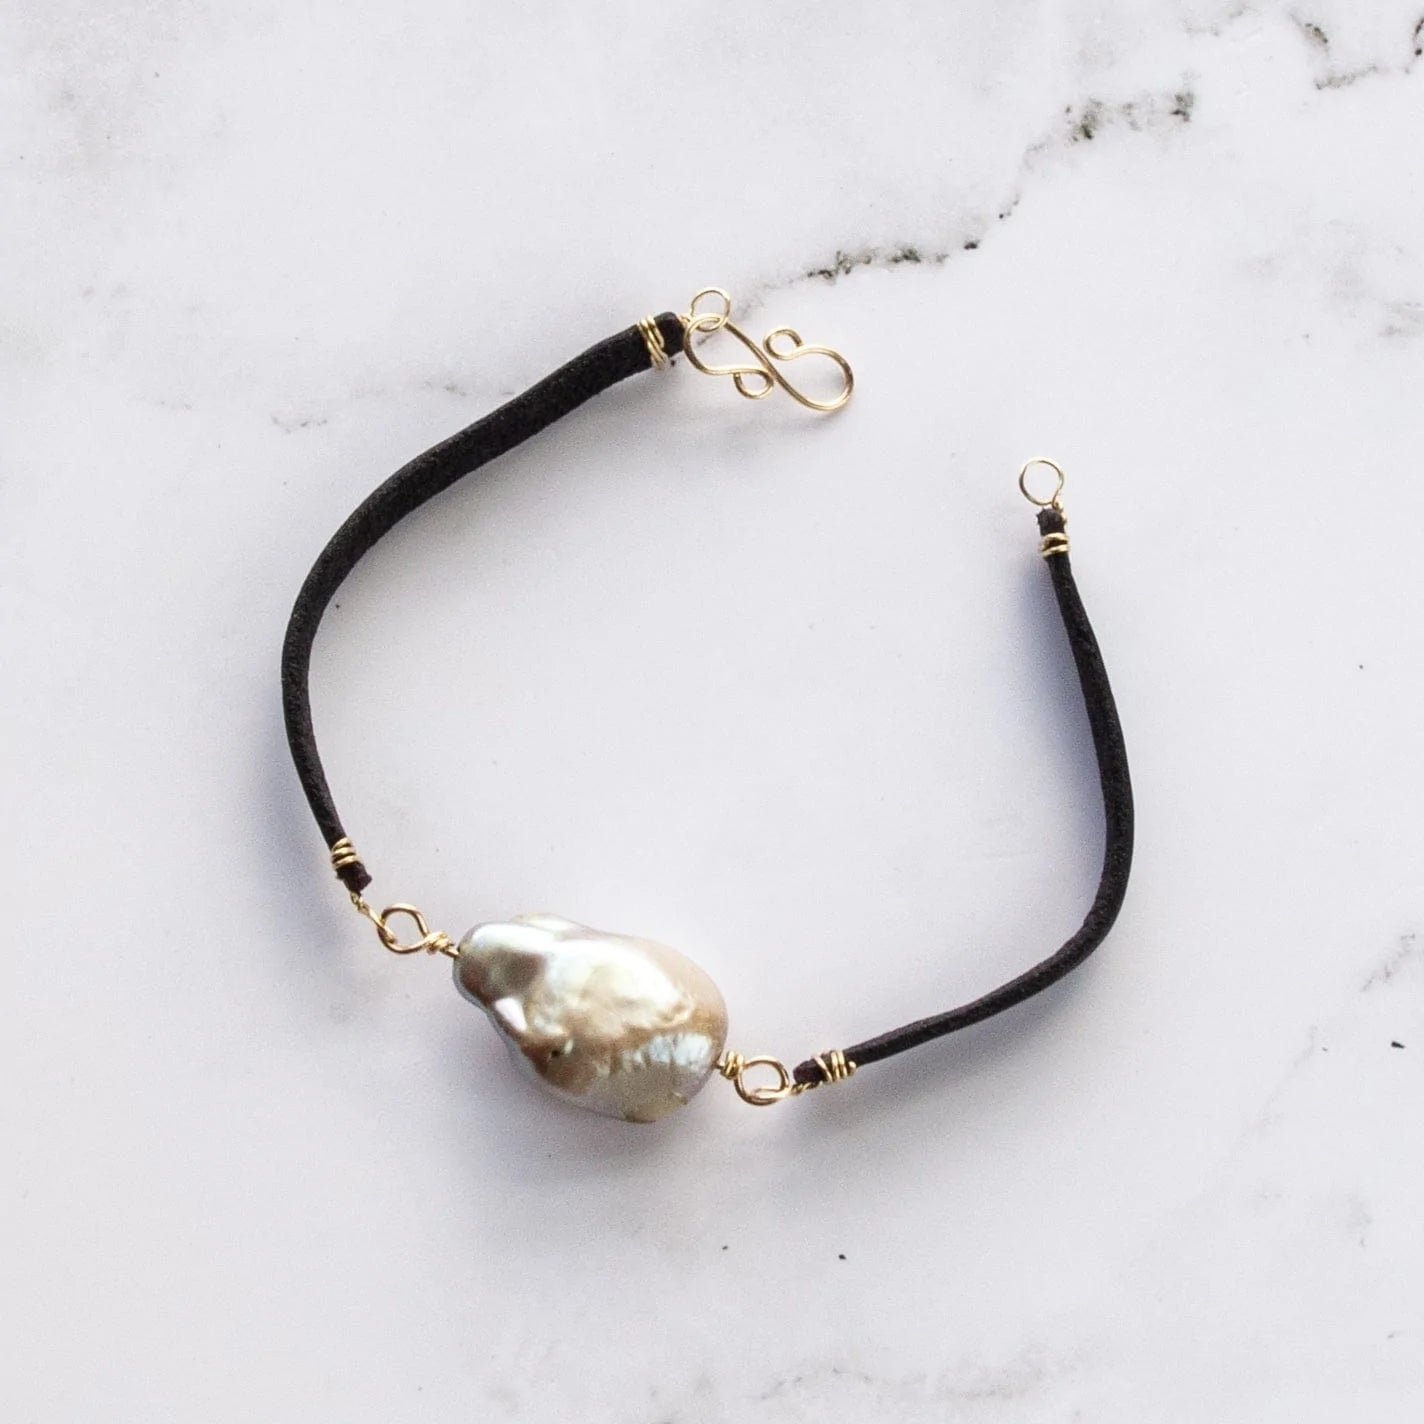 Cheekoo's Handcrafted Genuine Leather Bracelet with Freshwater Baroque Pearl and 14K Gold Chain and Clasp